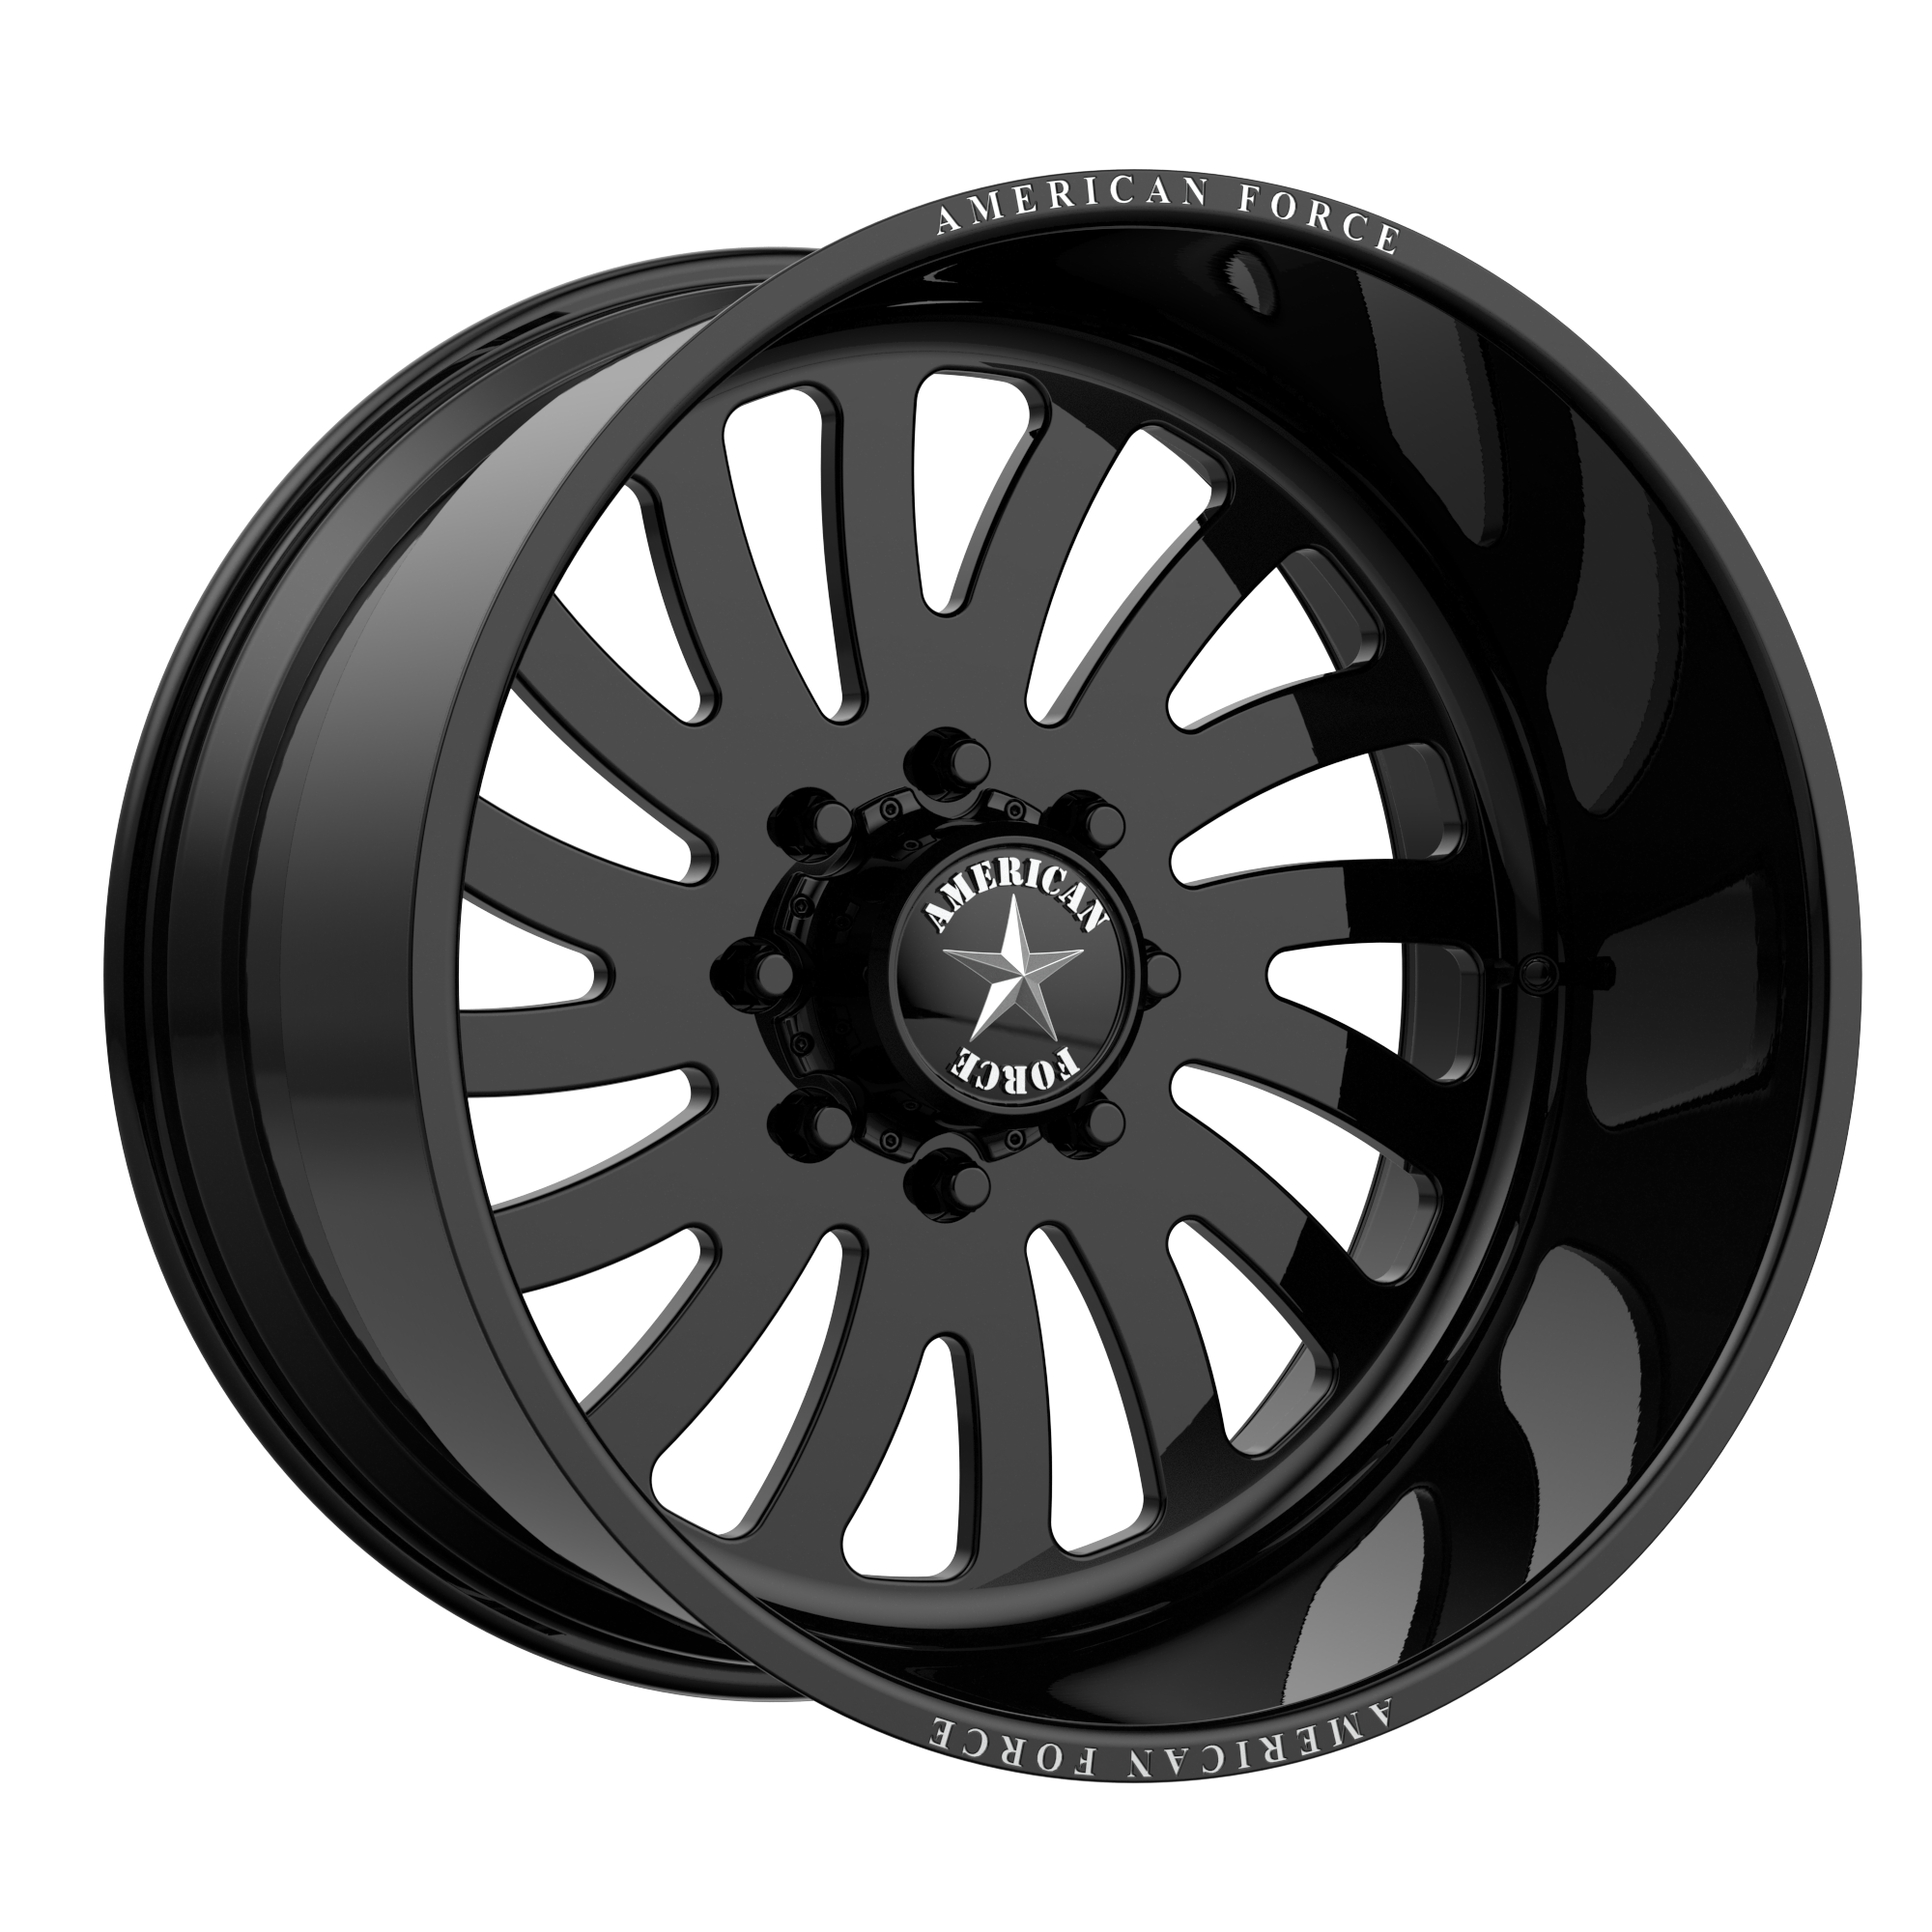 OCTANE SS 22x16 8x170.00 GLOSS BLACK MACHINED (-99 mm) - Tires and Engine Performance